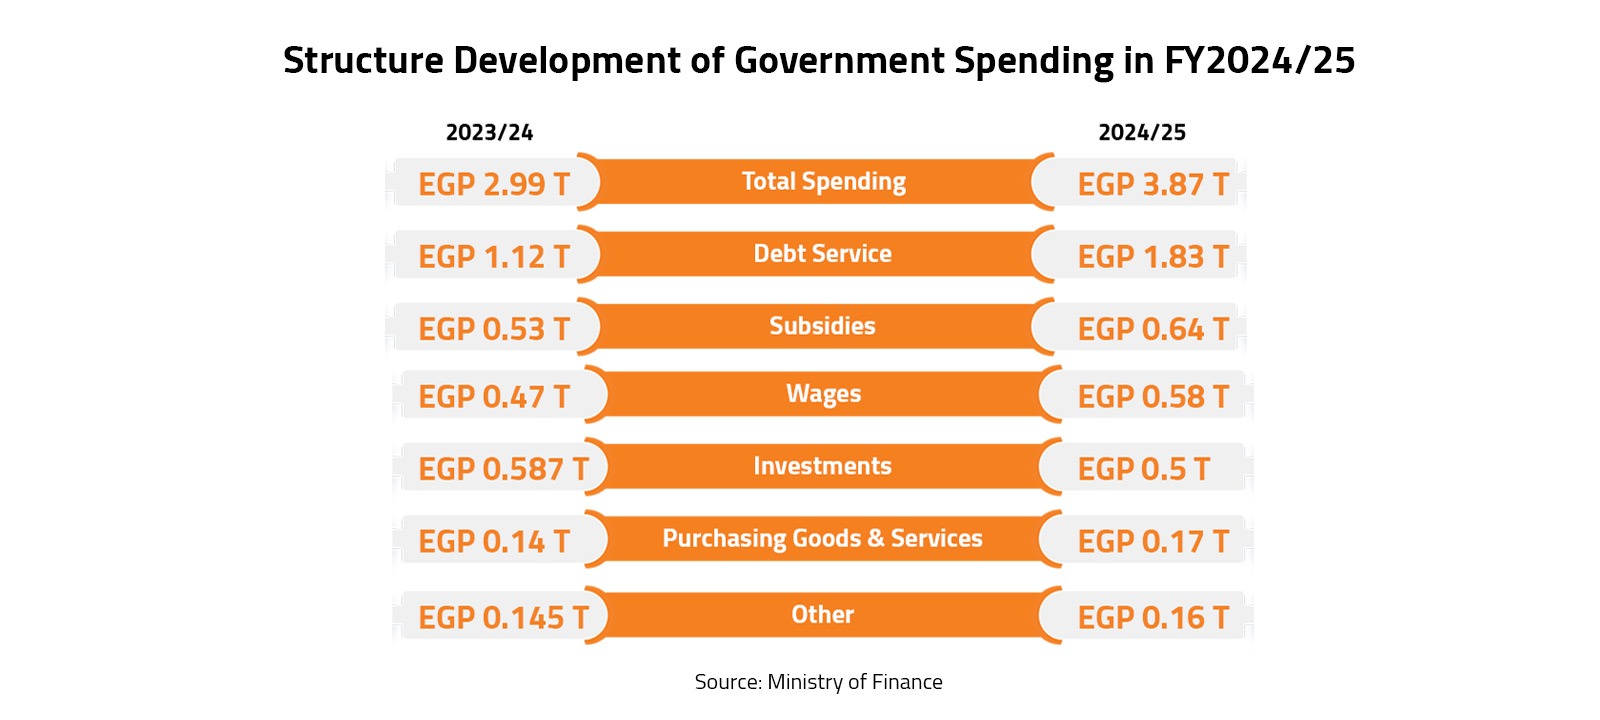 Structure Development of Government Spending in FY2024/25